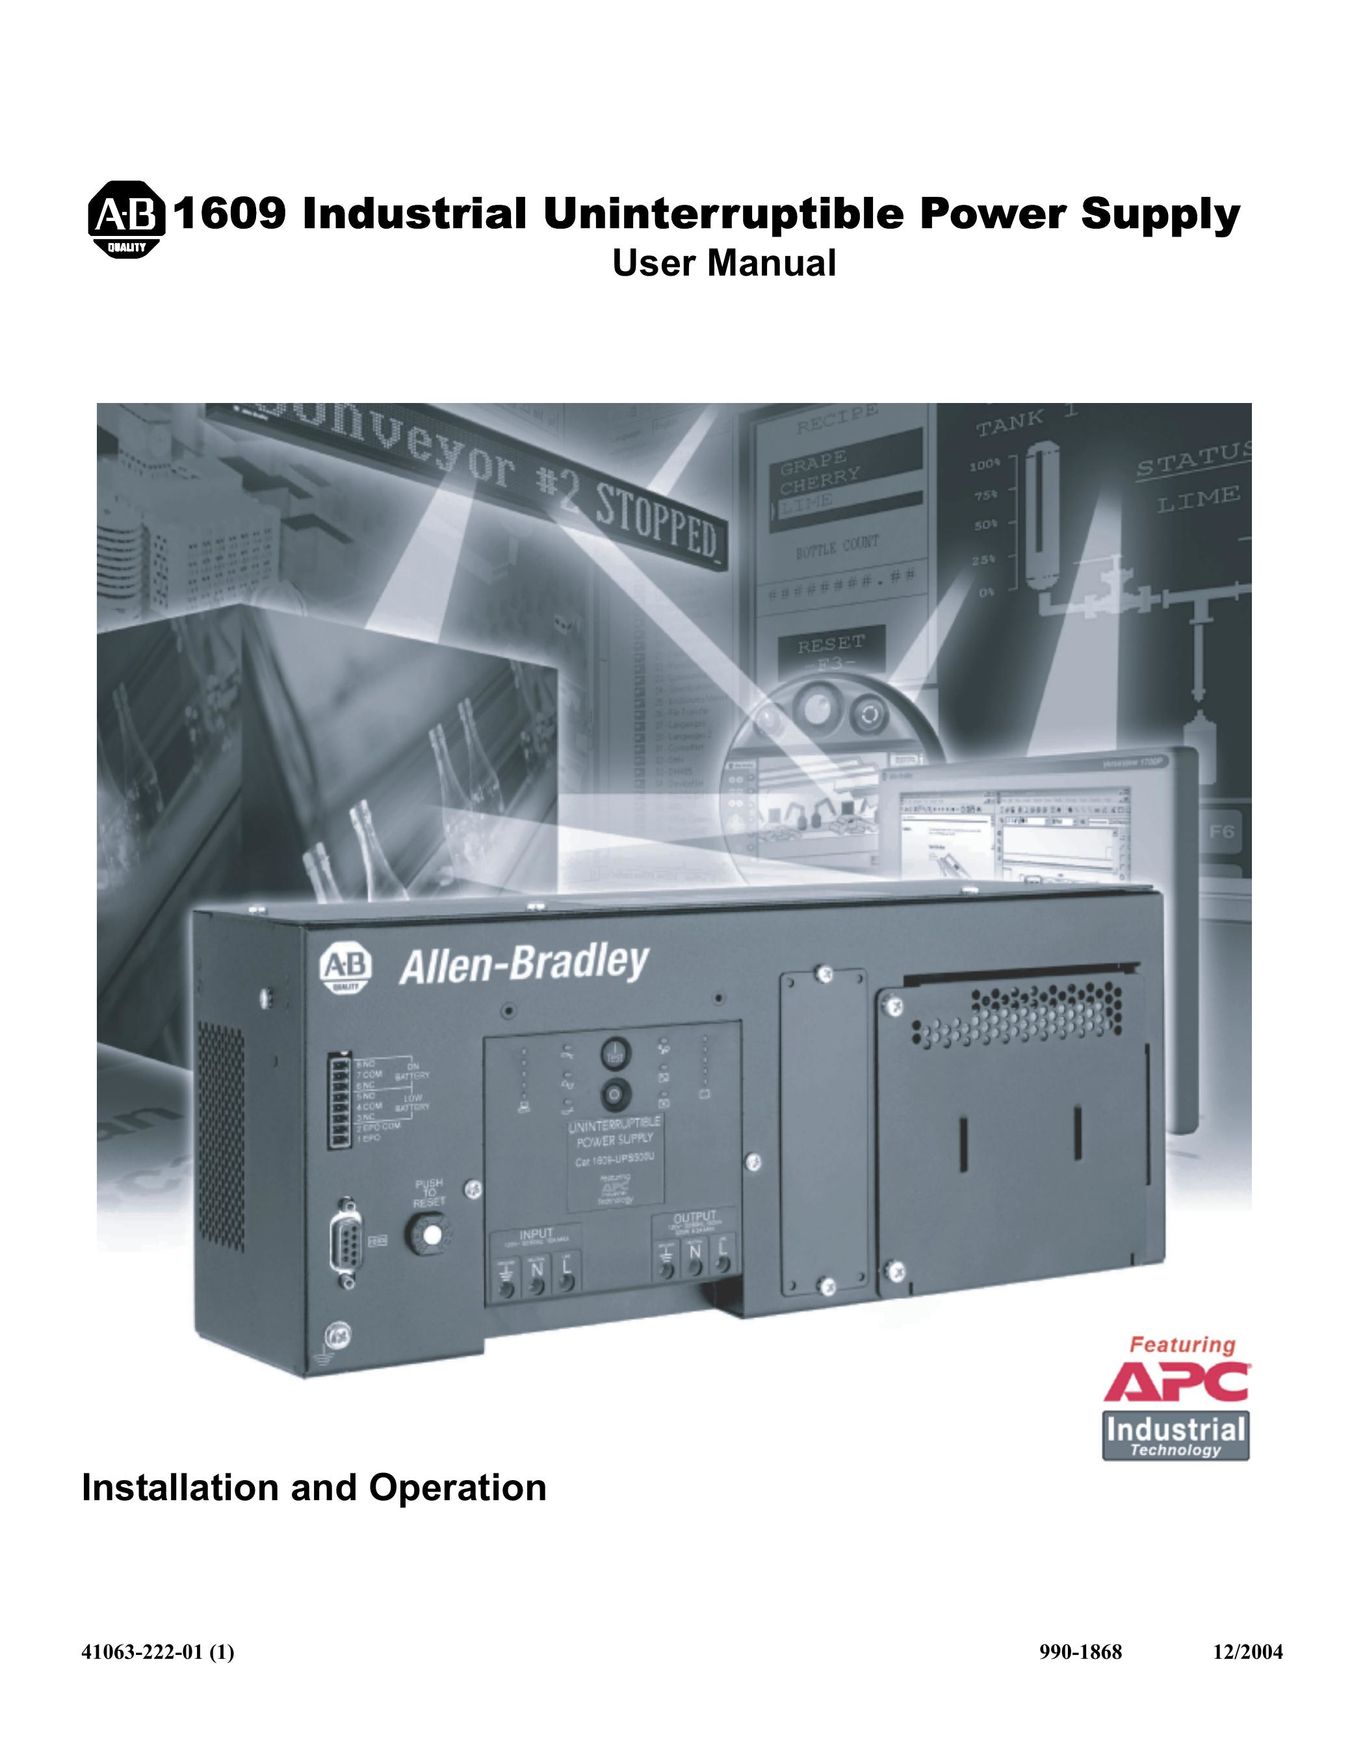 American Power Conversion 1609 Power Supply User Manual (Page 1)